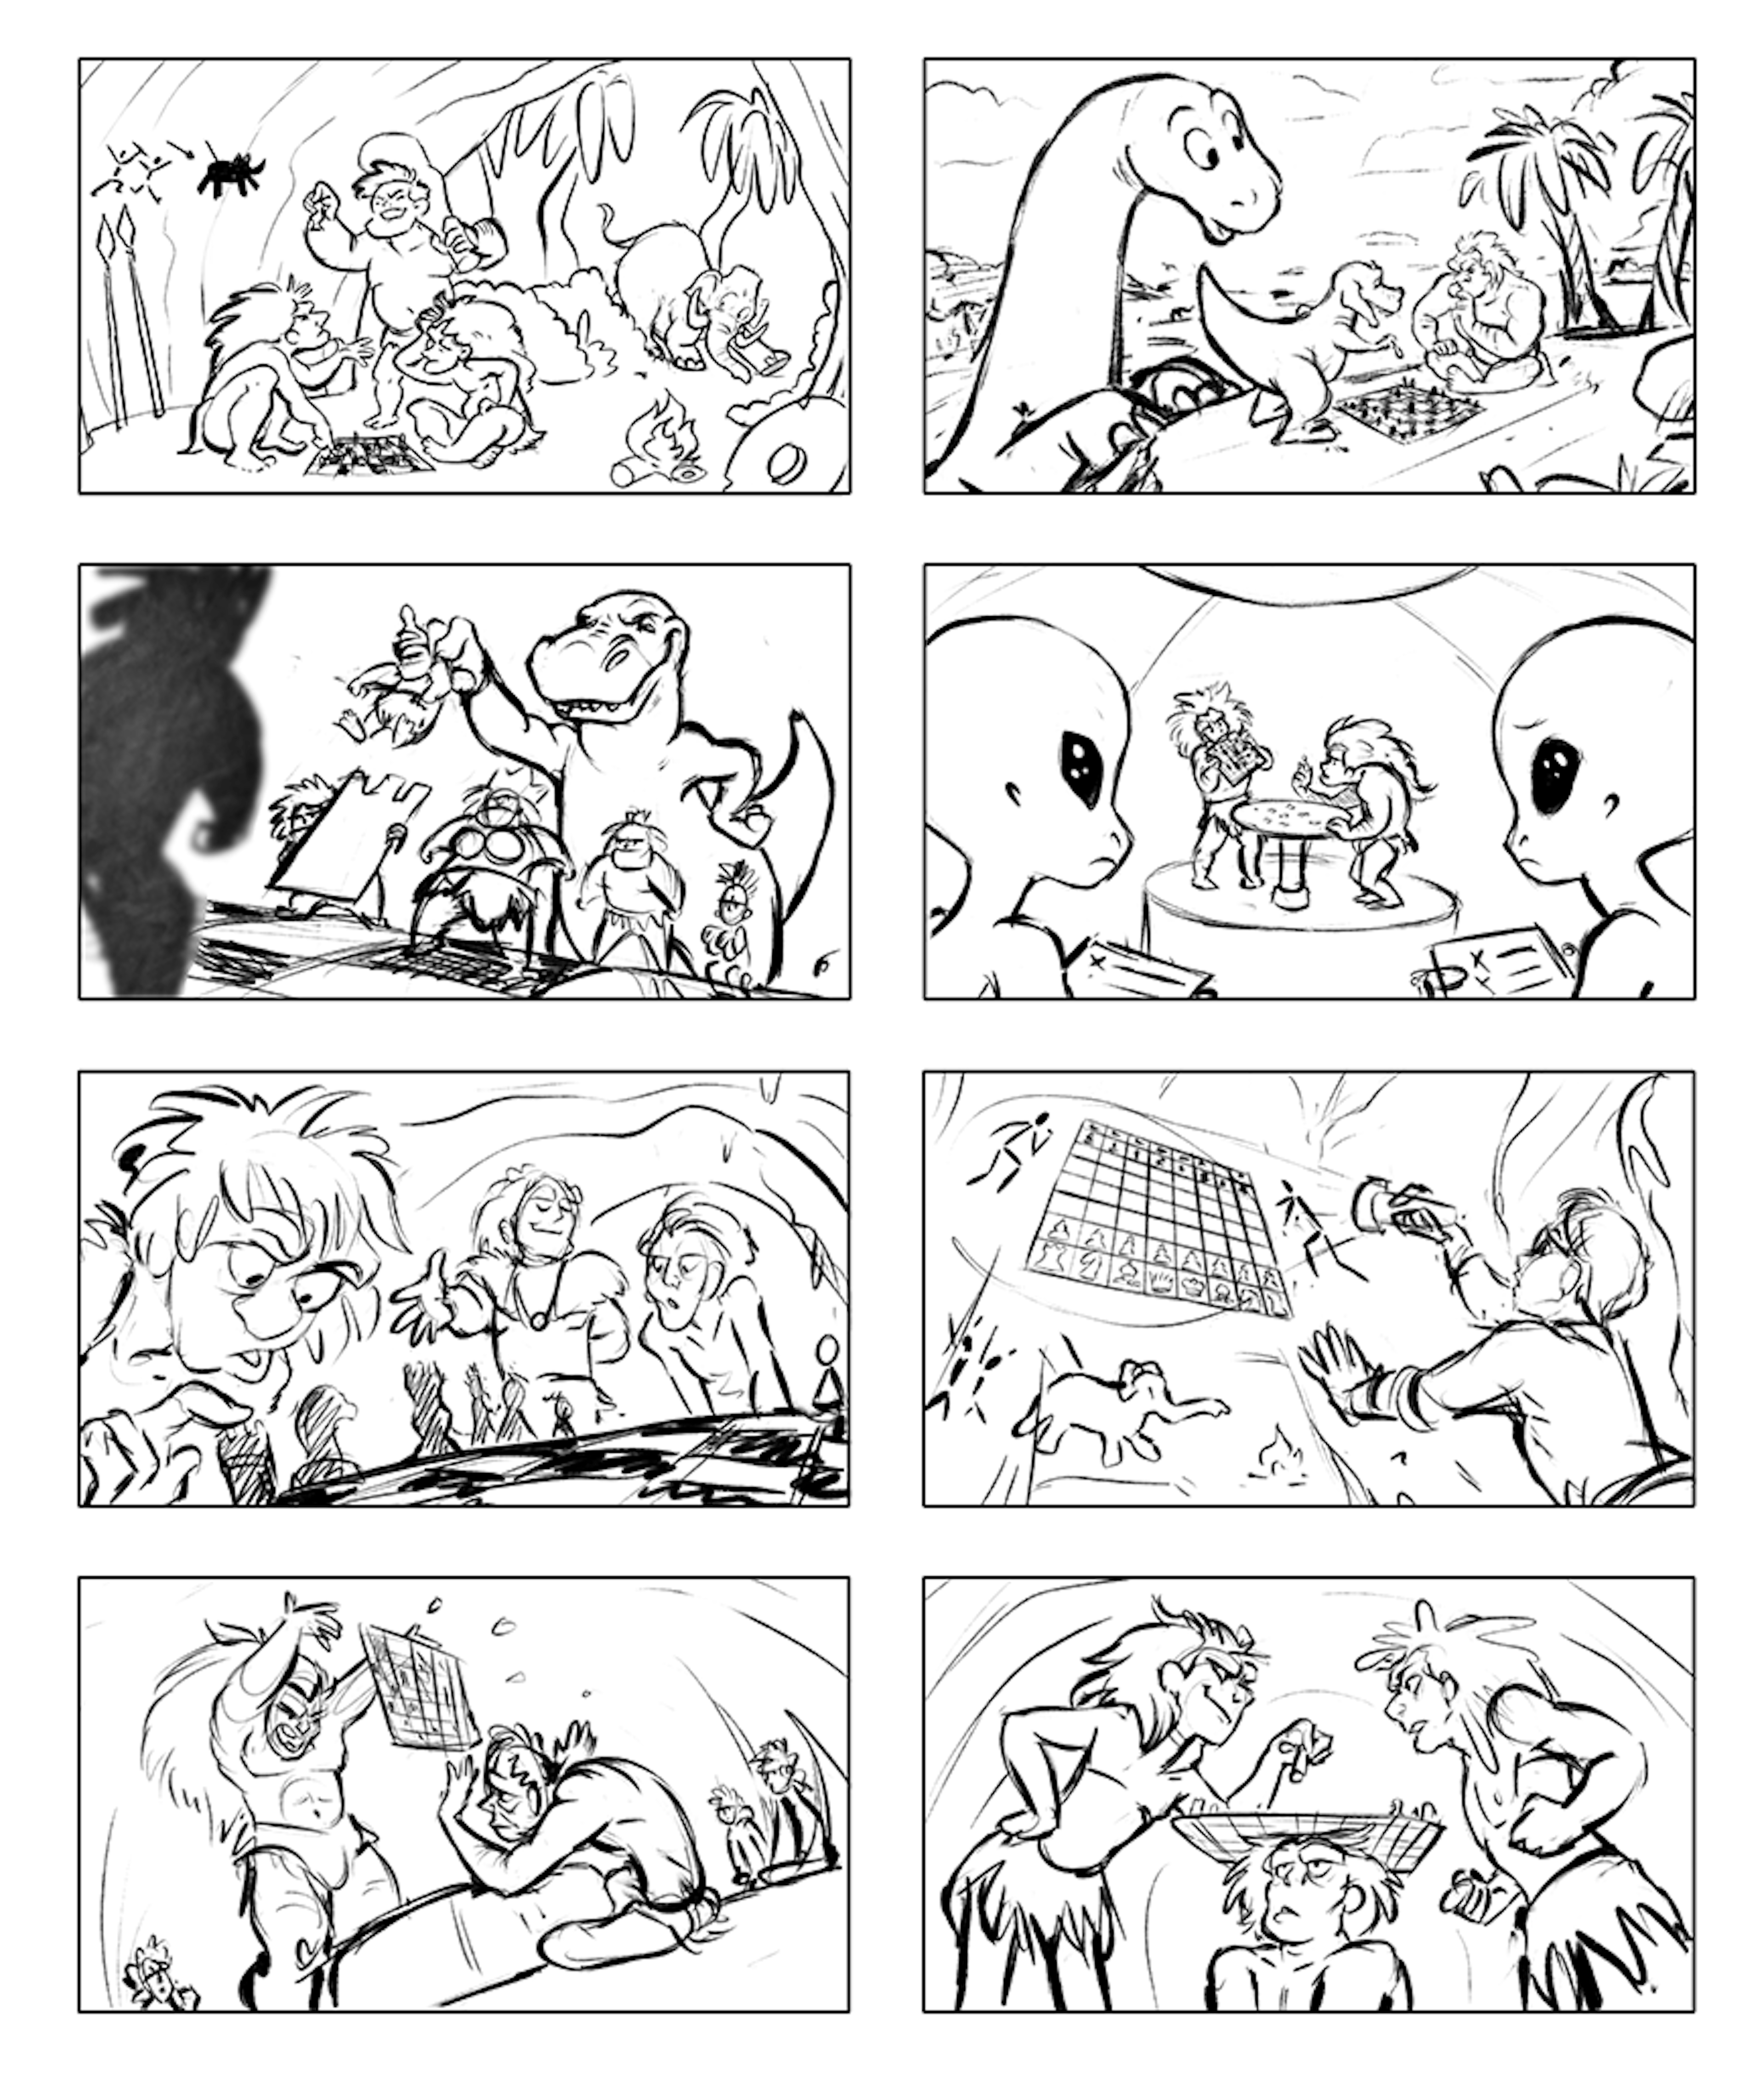 Storyboards of an alien game